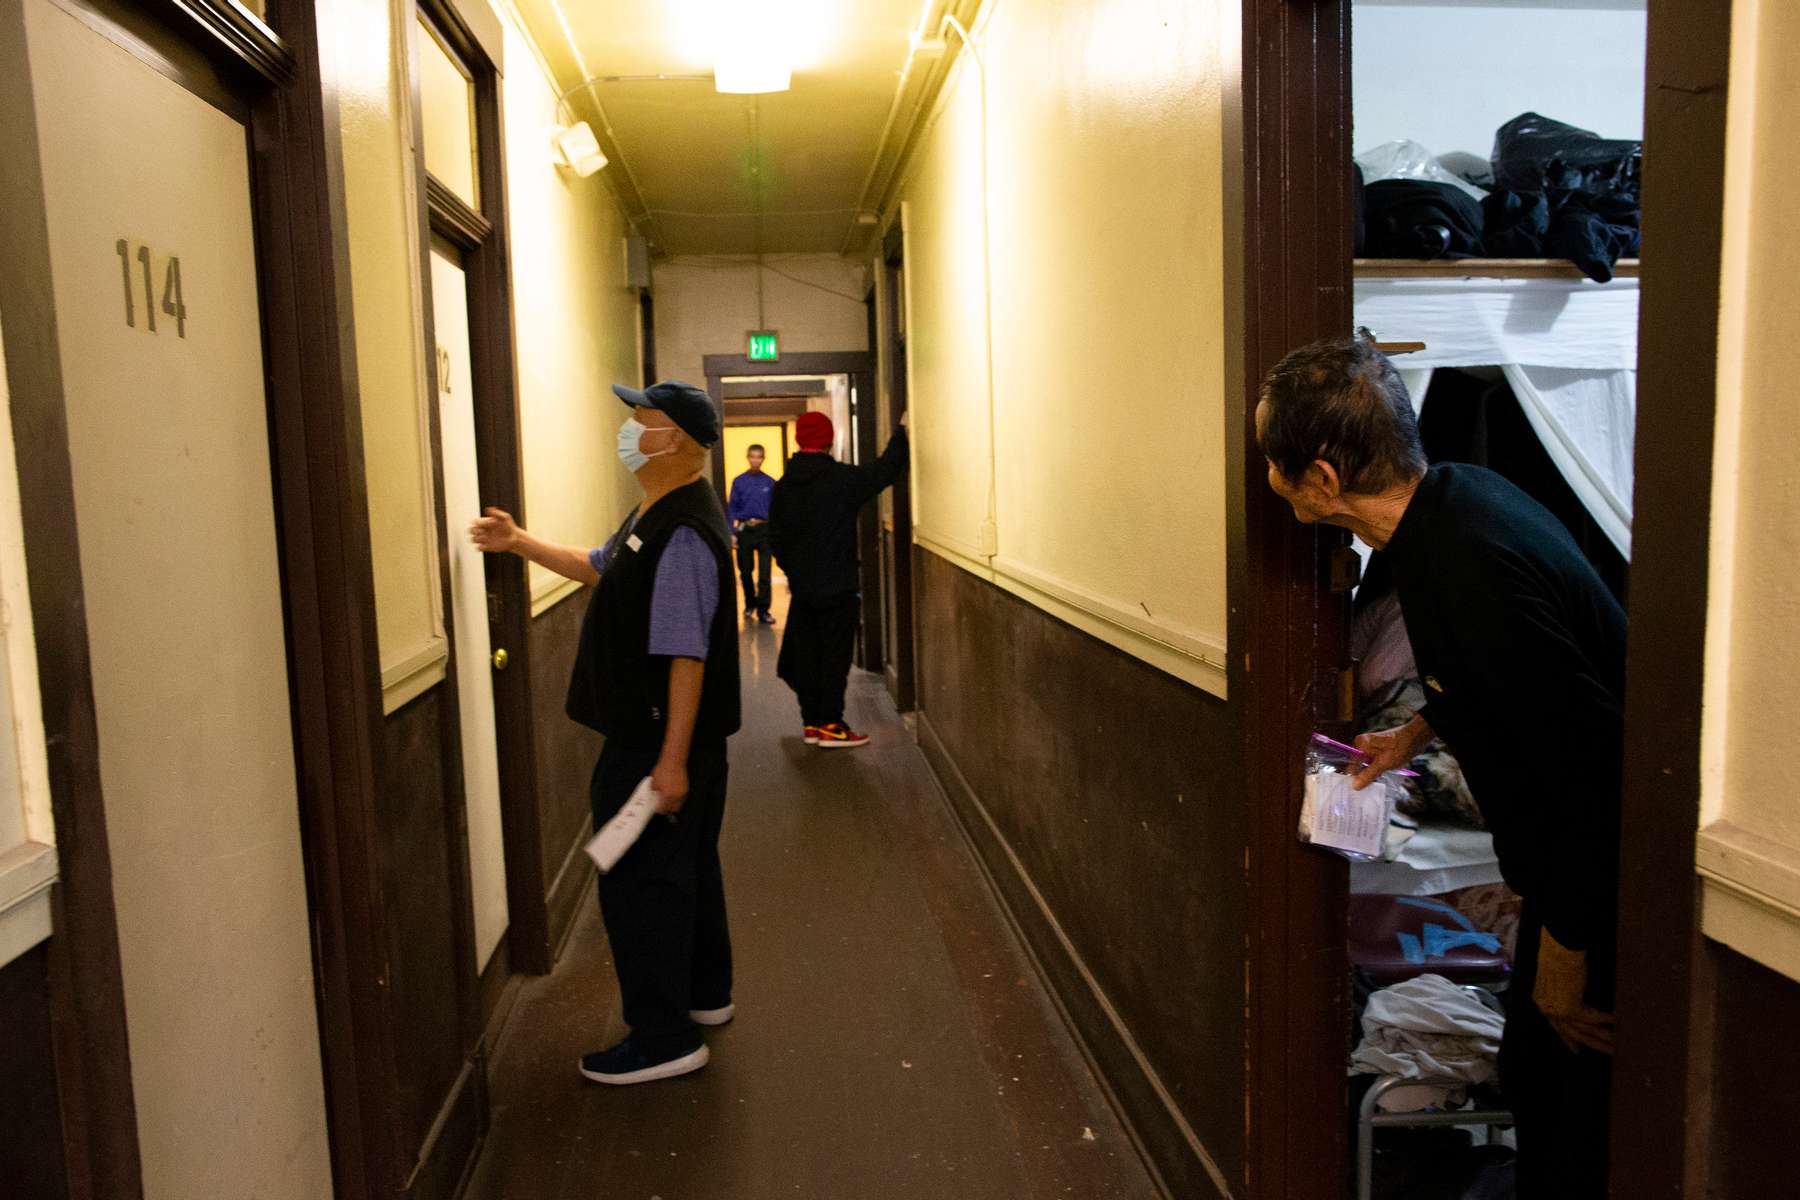 A resident in the Bing Kong Association building, a single room occupancy building, peers out from his door at the commotion in the hallway on April 21, 2020 in the Chinatown-International District in Seattle, WA. An employee from the Seattle Chinatown International District Preservation and Development Authority (SCIDpda) delivers masks to residents with the help from the building manager. Each bag contains three masks that were handmade and donated. 